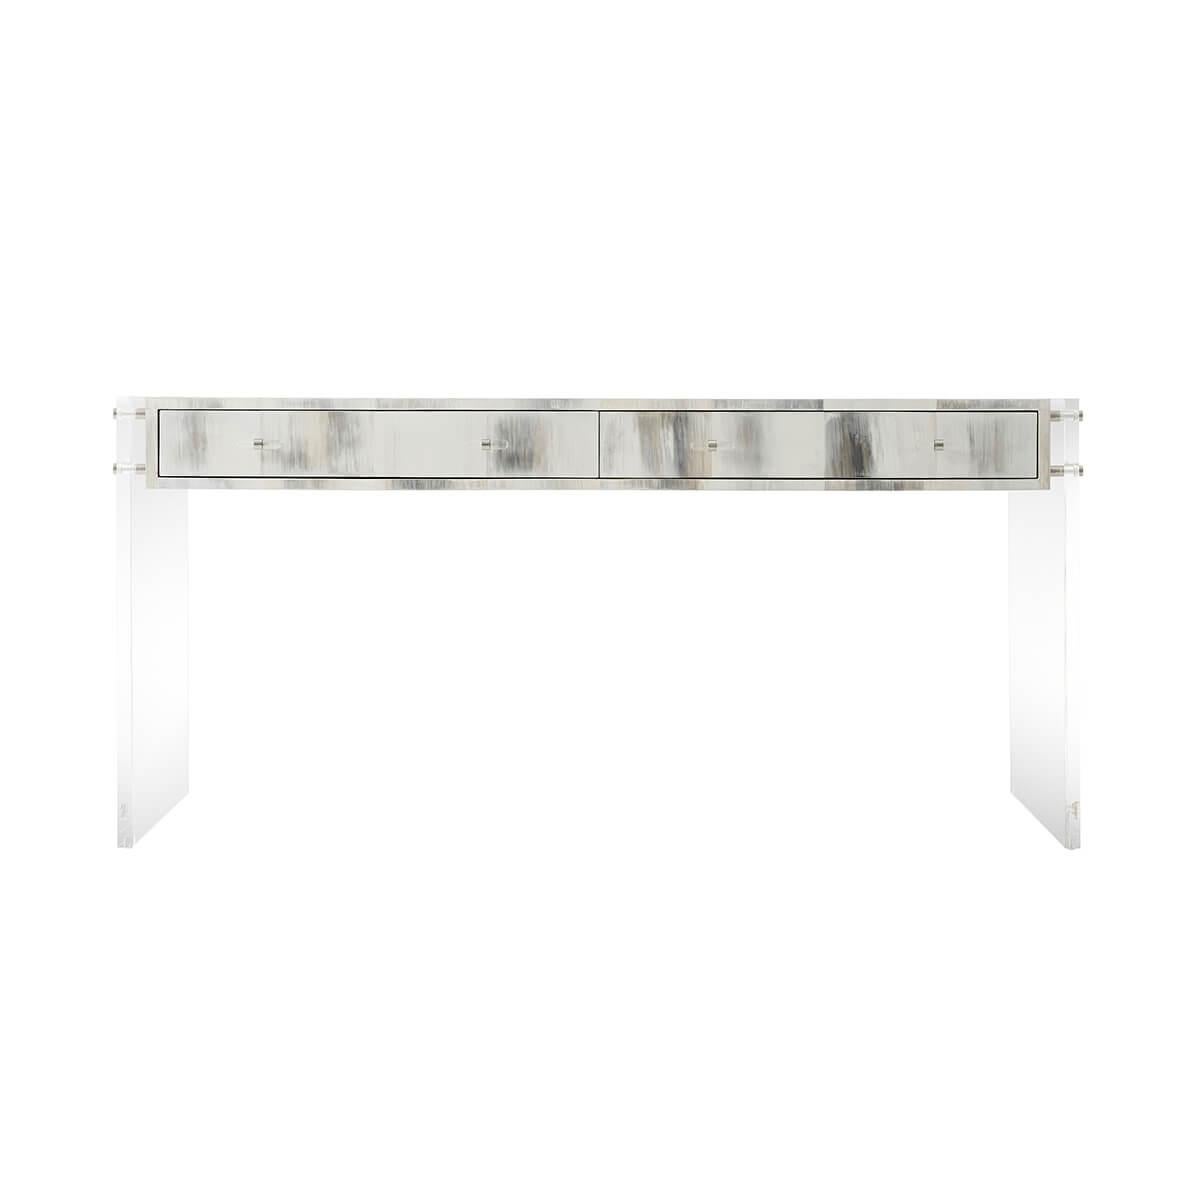 With a hand-painted faux horn tiled top with two frieze drawers. Acrylic baton pulls with stainless steel collars accent the acrylic end supports with stainless steel accents.

Dimensions: 65